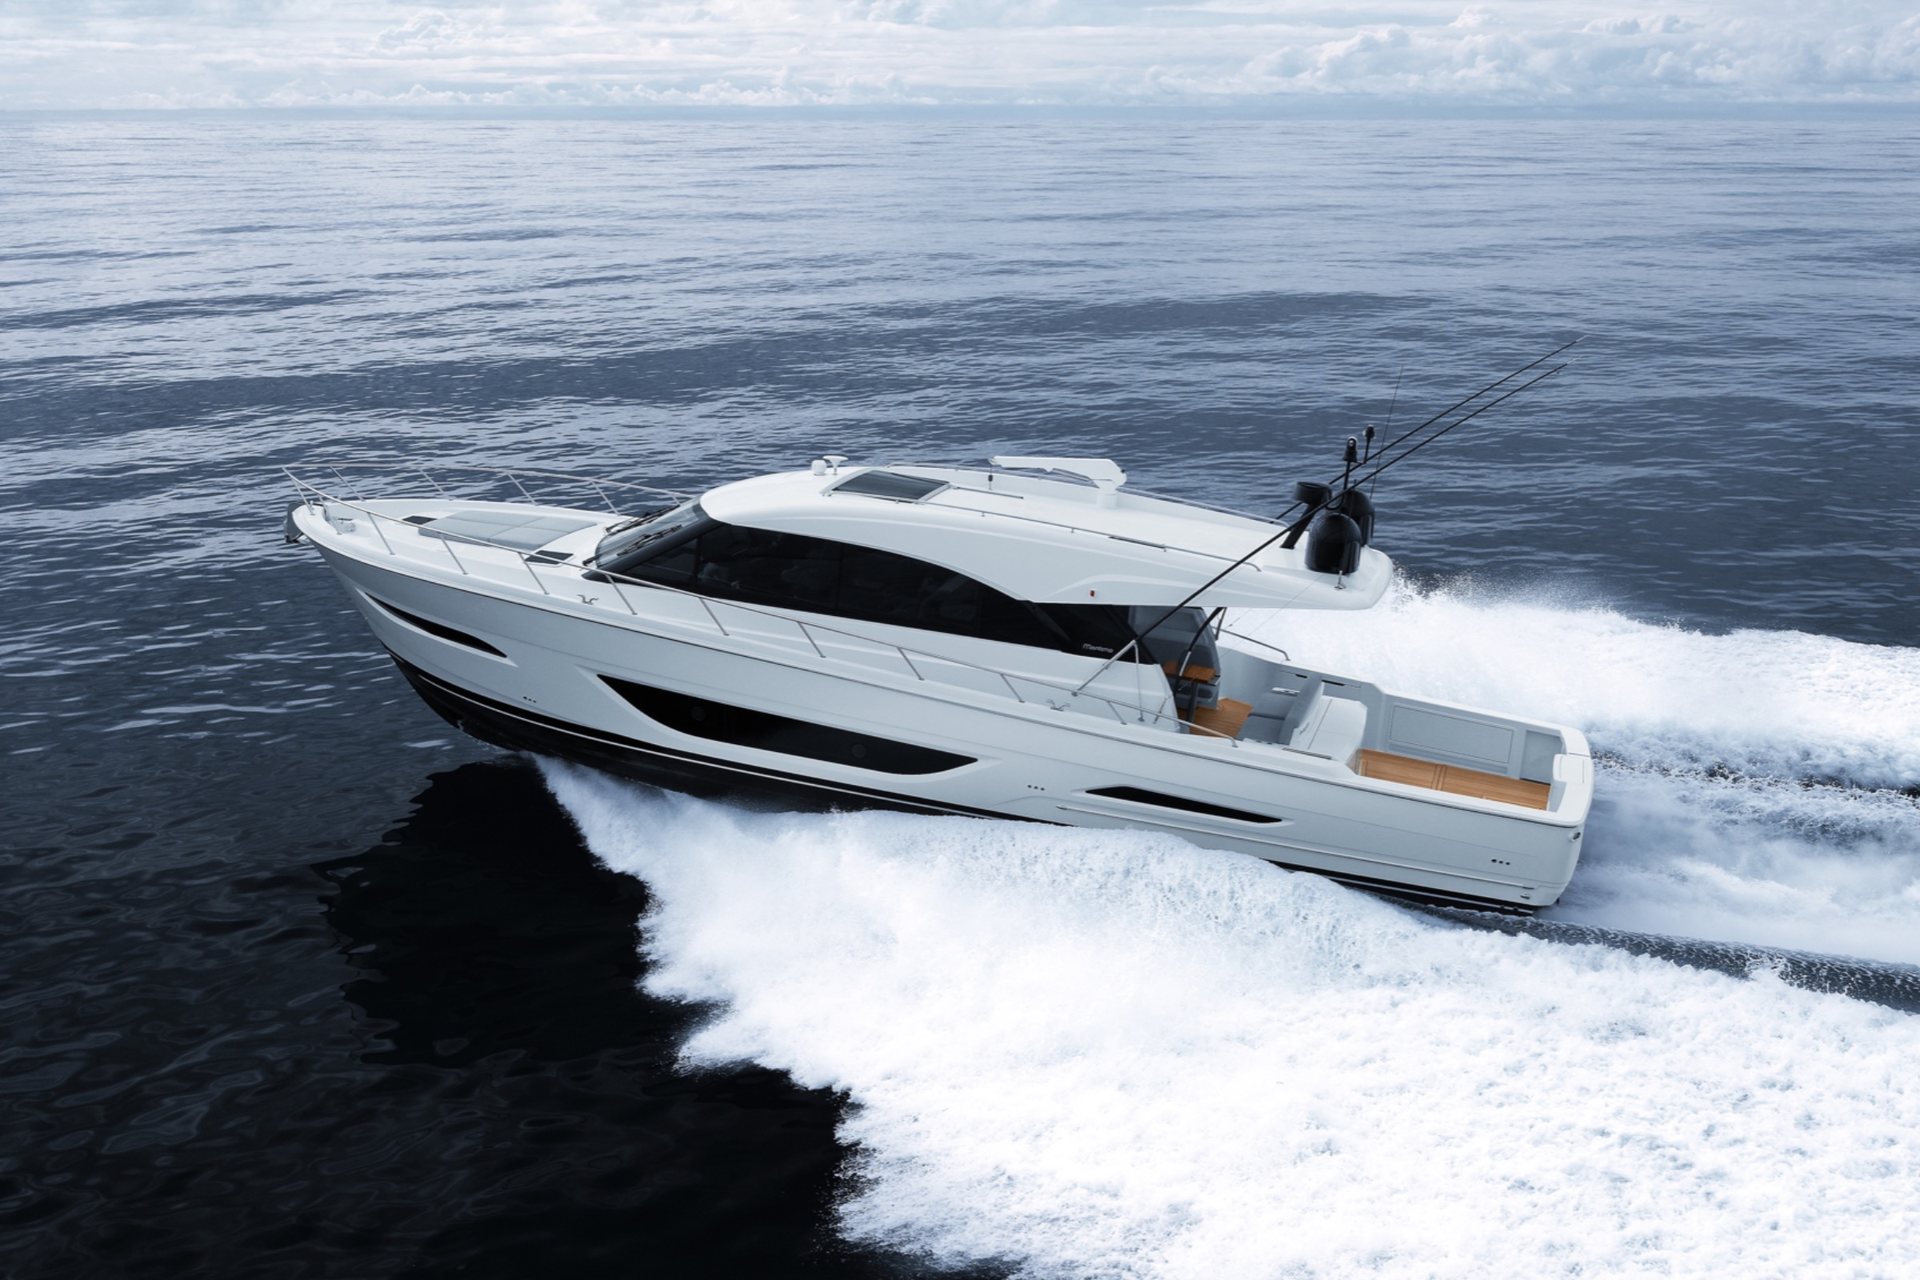 360 VR Virtual Tours of the Maritimo S600